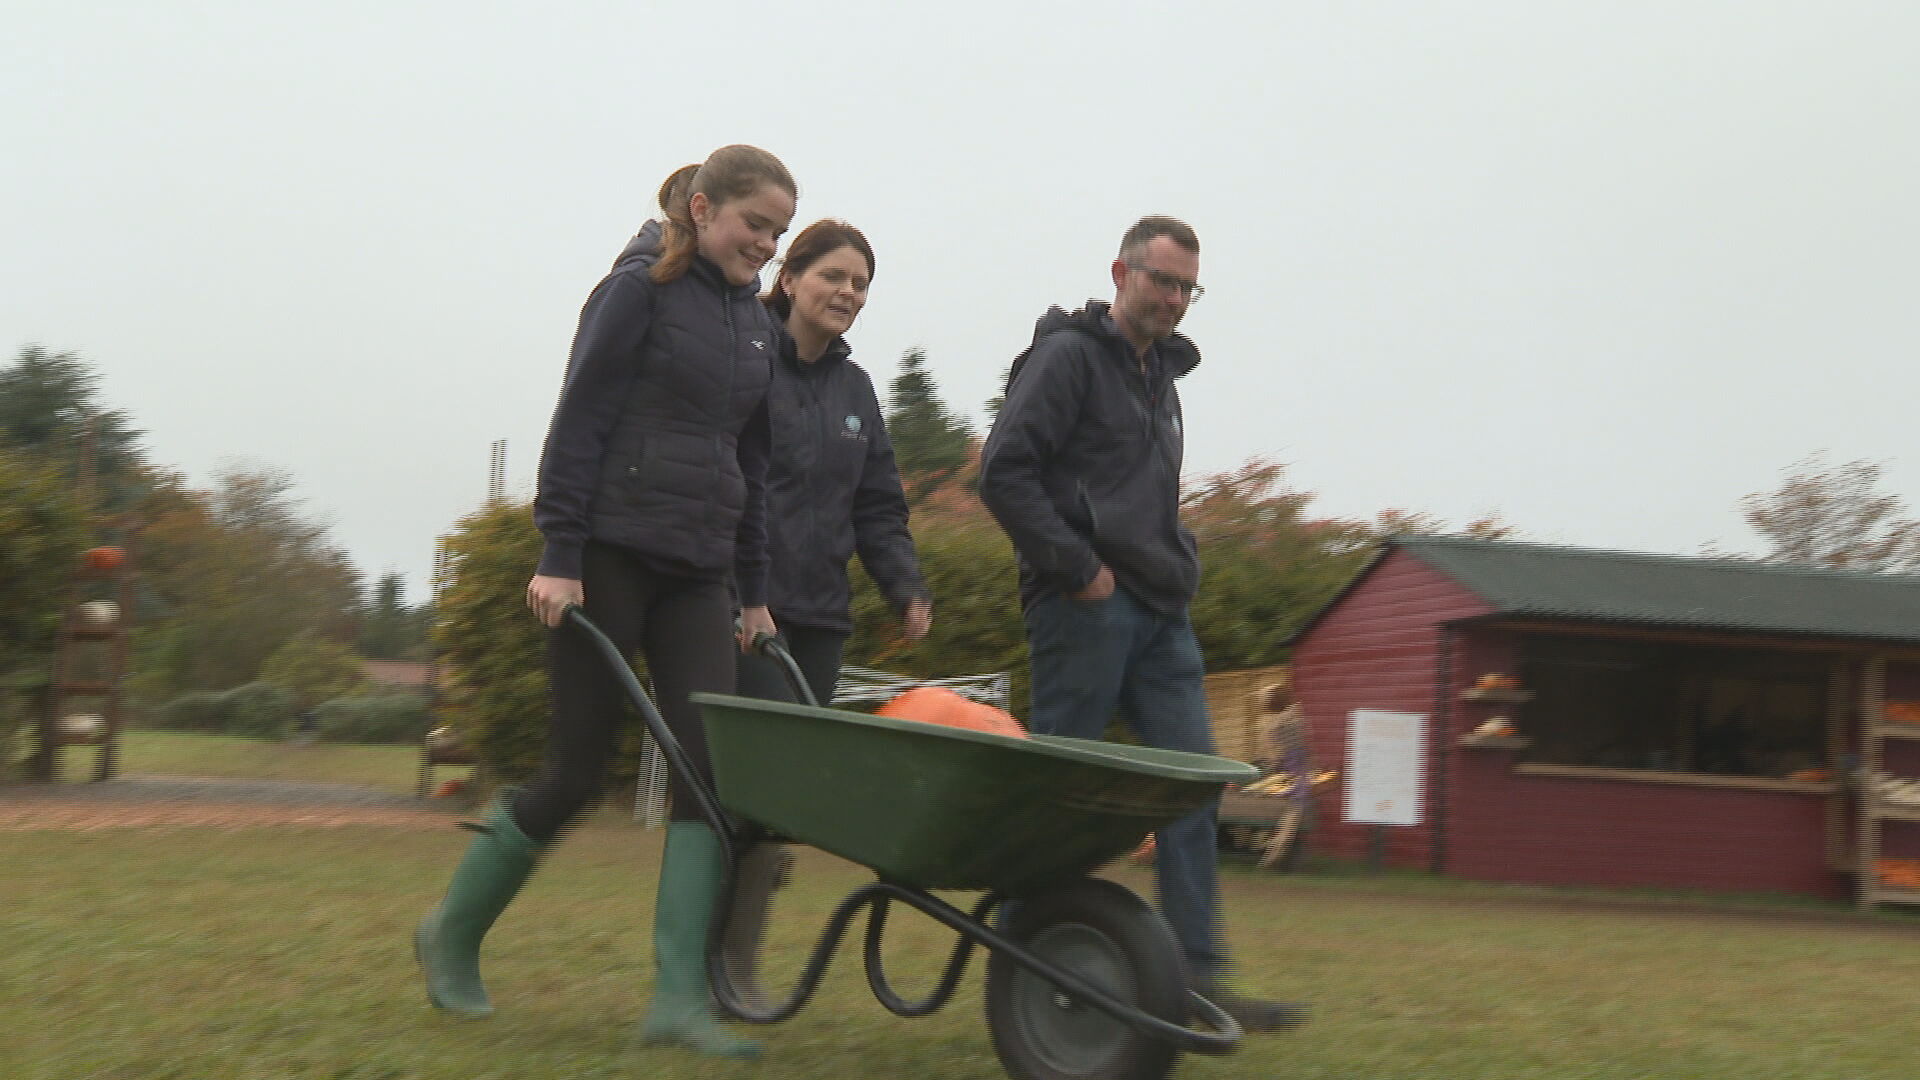 Louisa with her mum, Lucy and dad, Russell, collecting pumpkins at Kilduff Farm for the kids. 